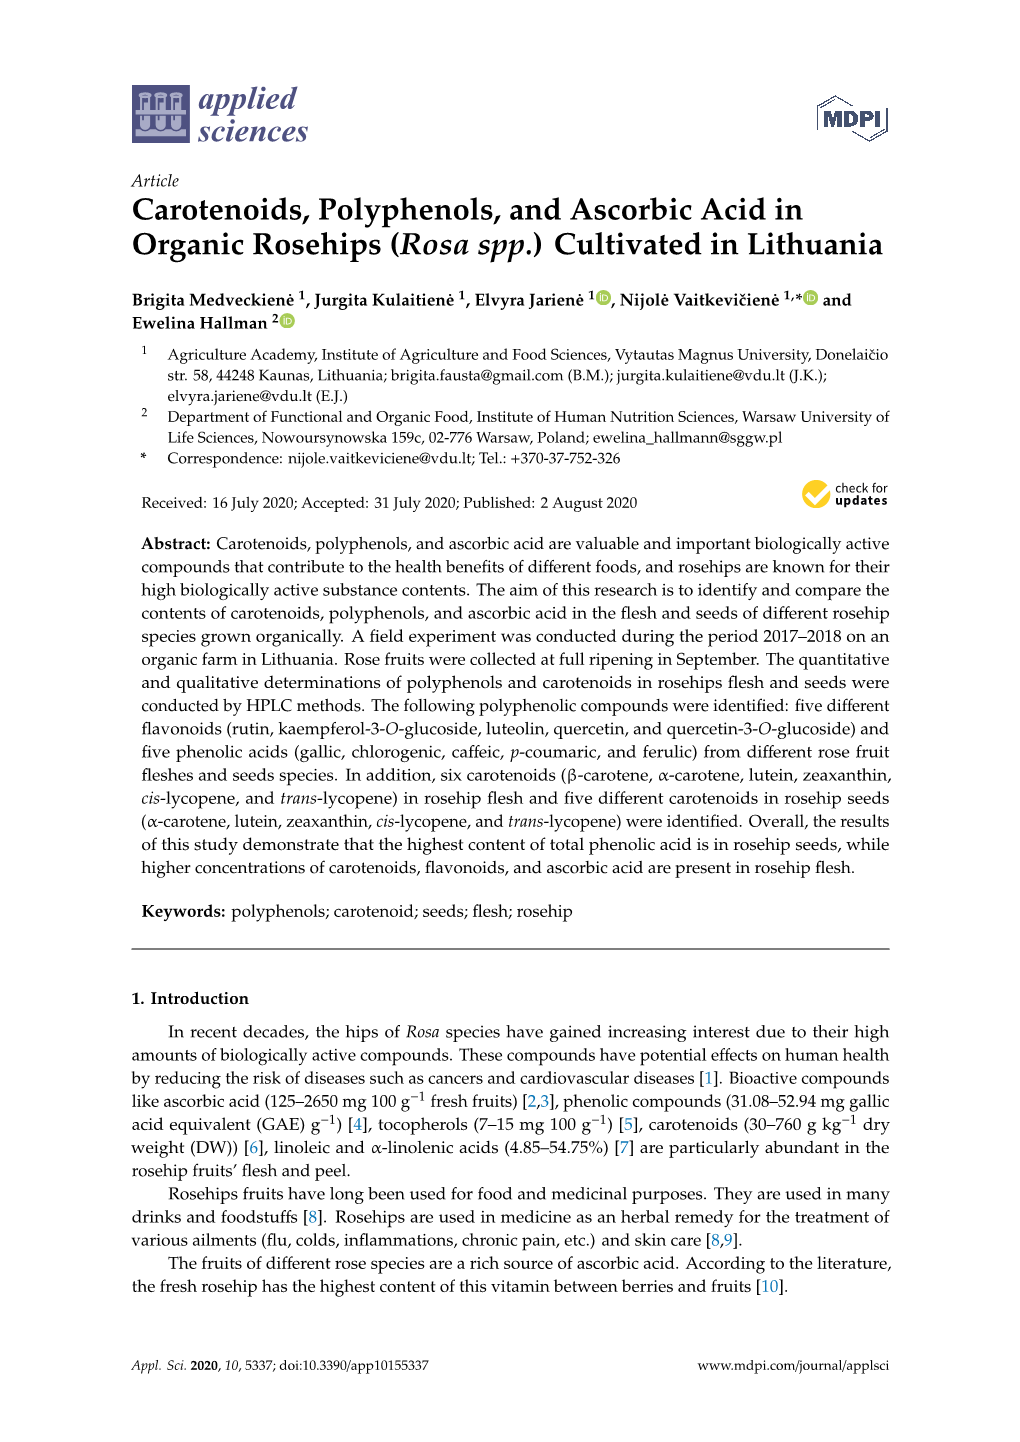 Carotenoids, Polyphenols, and Ascorbic Acid in Organic Rosehips (Rosa Spp.) Cultivated in Lithuania